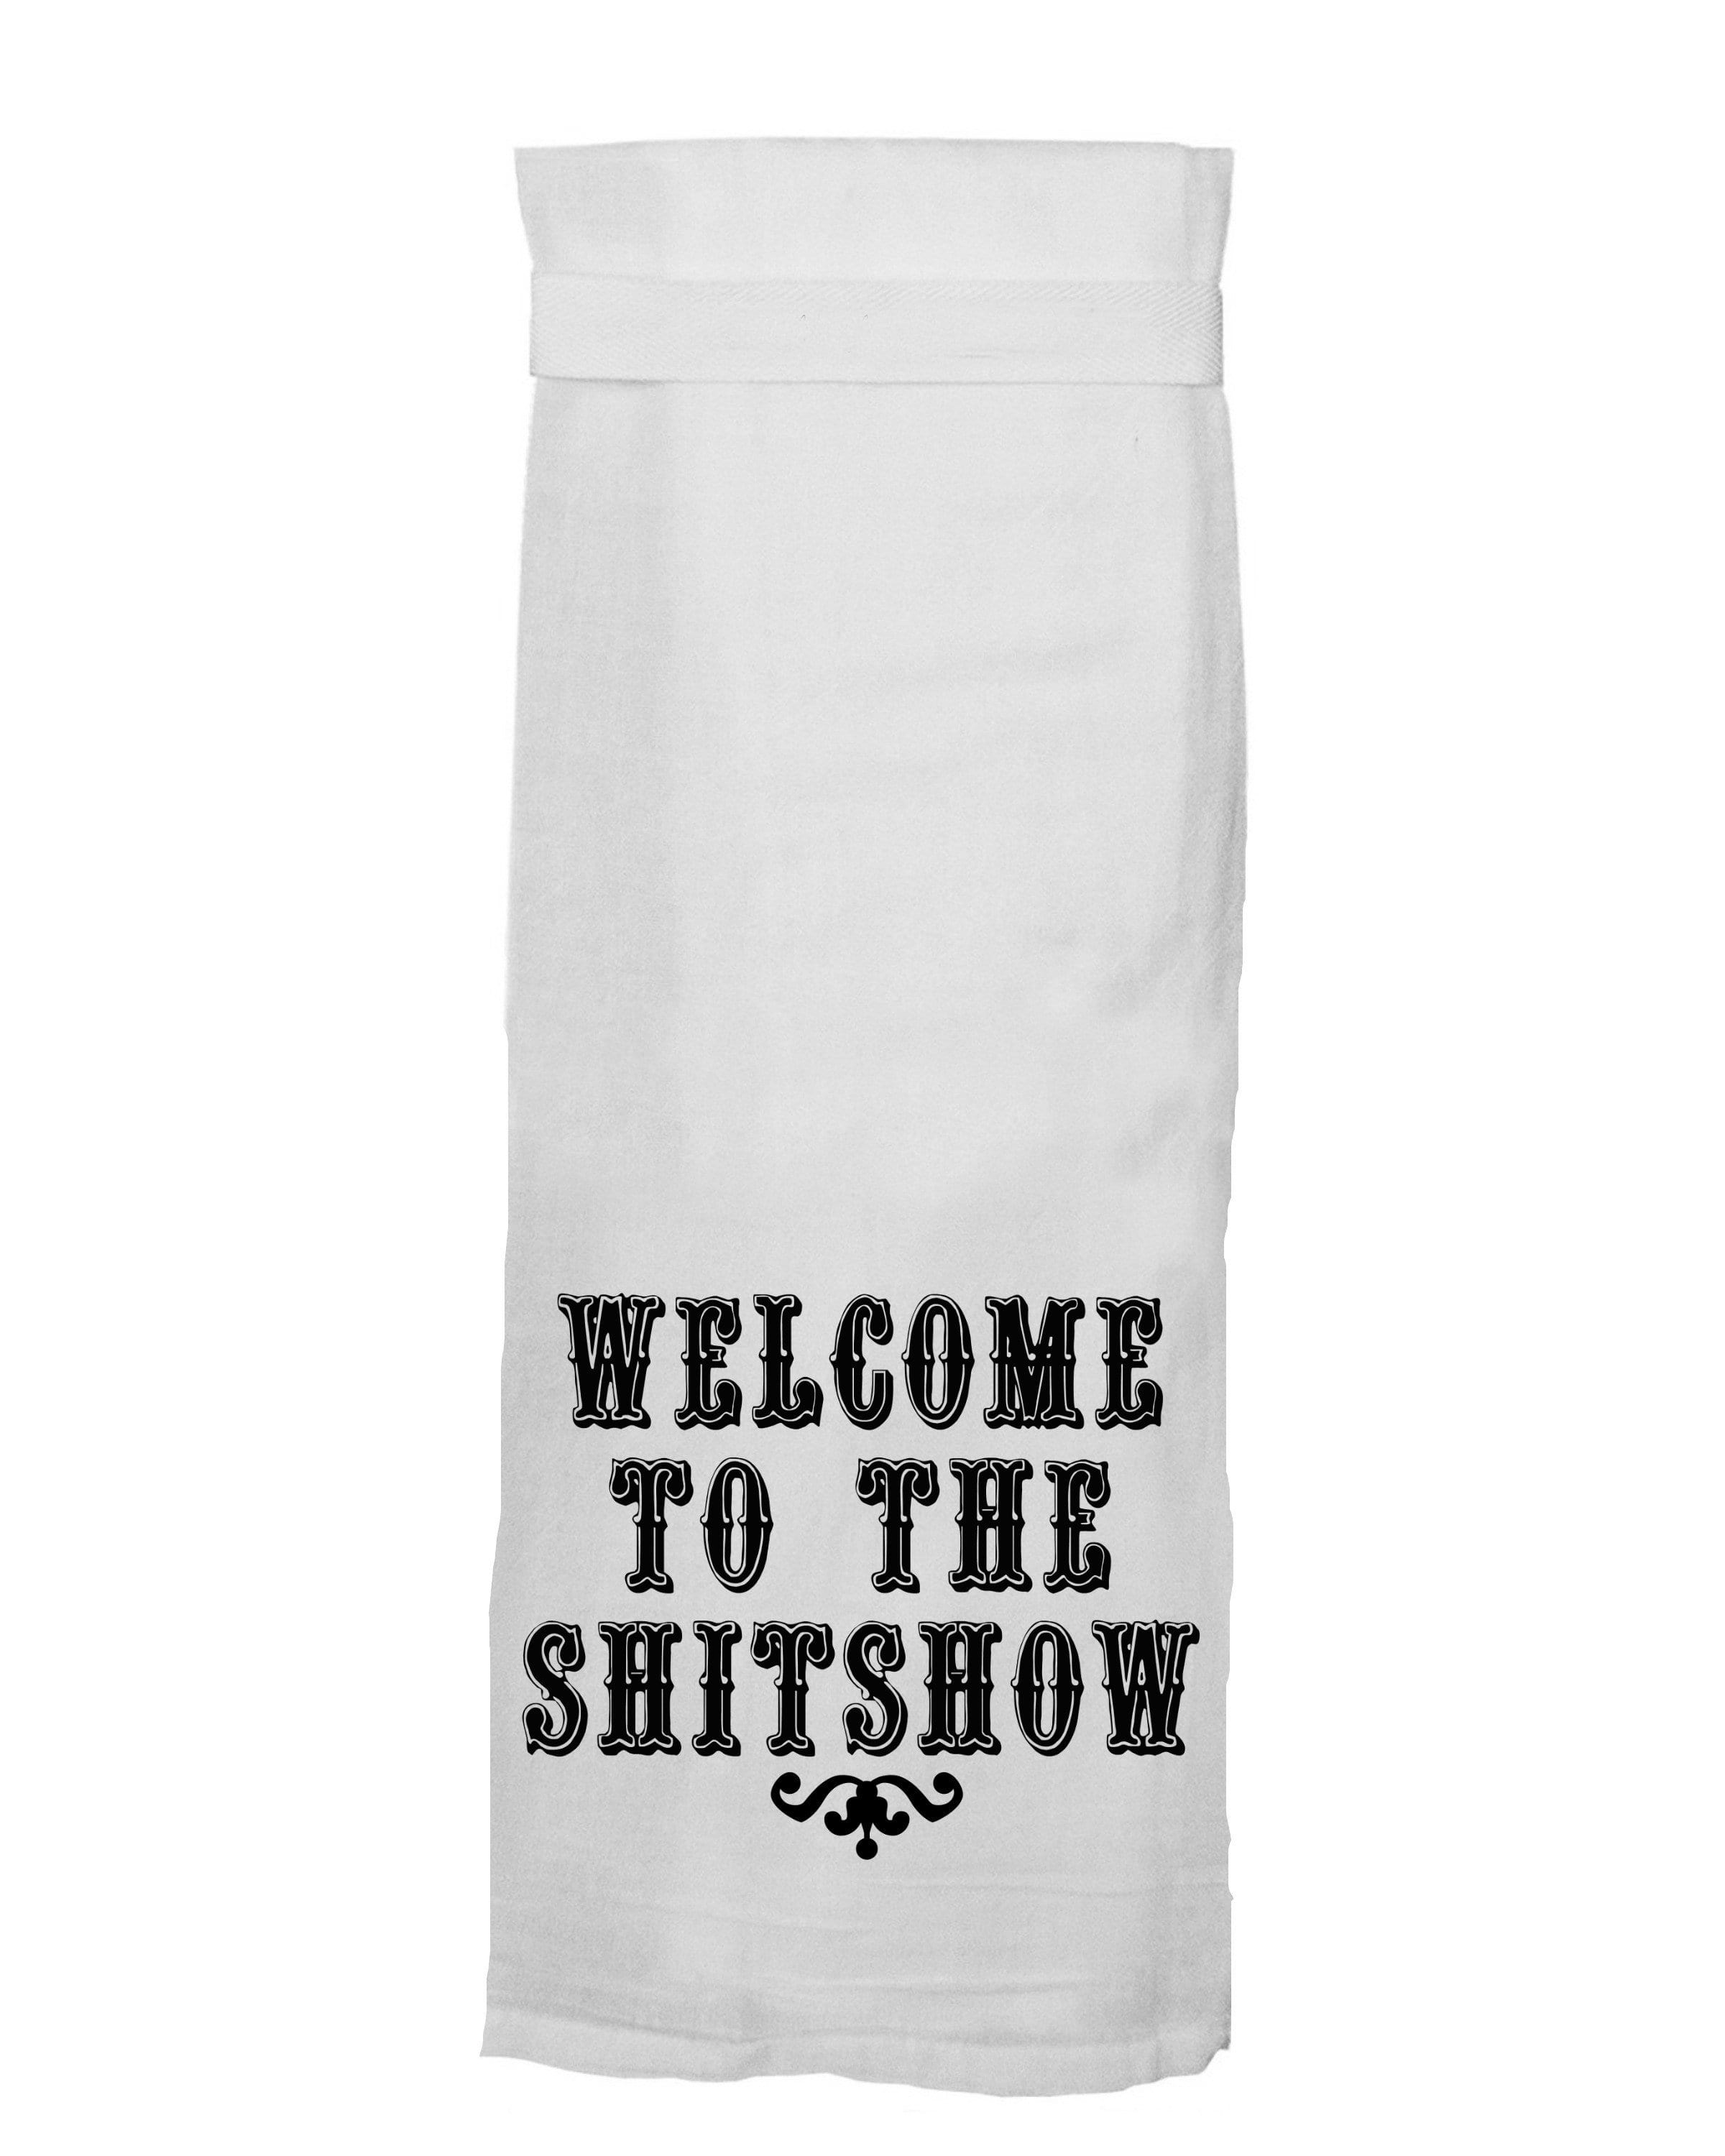 Hang Tight Towel Welcome to the Shitshow - BodyFactory